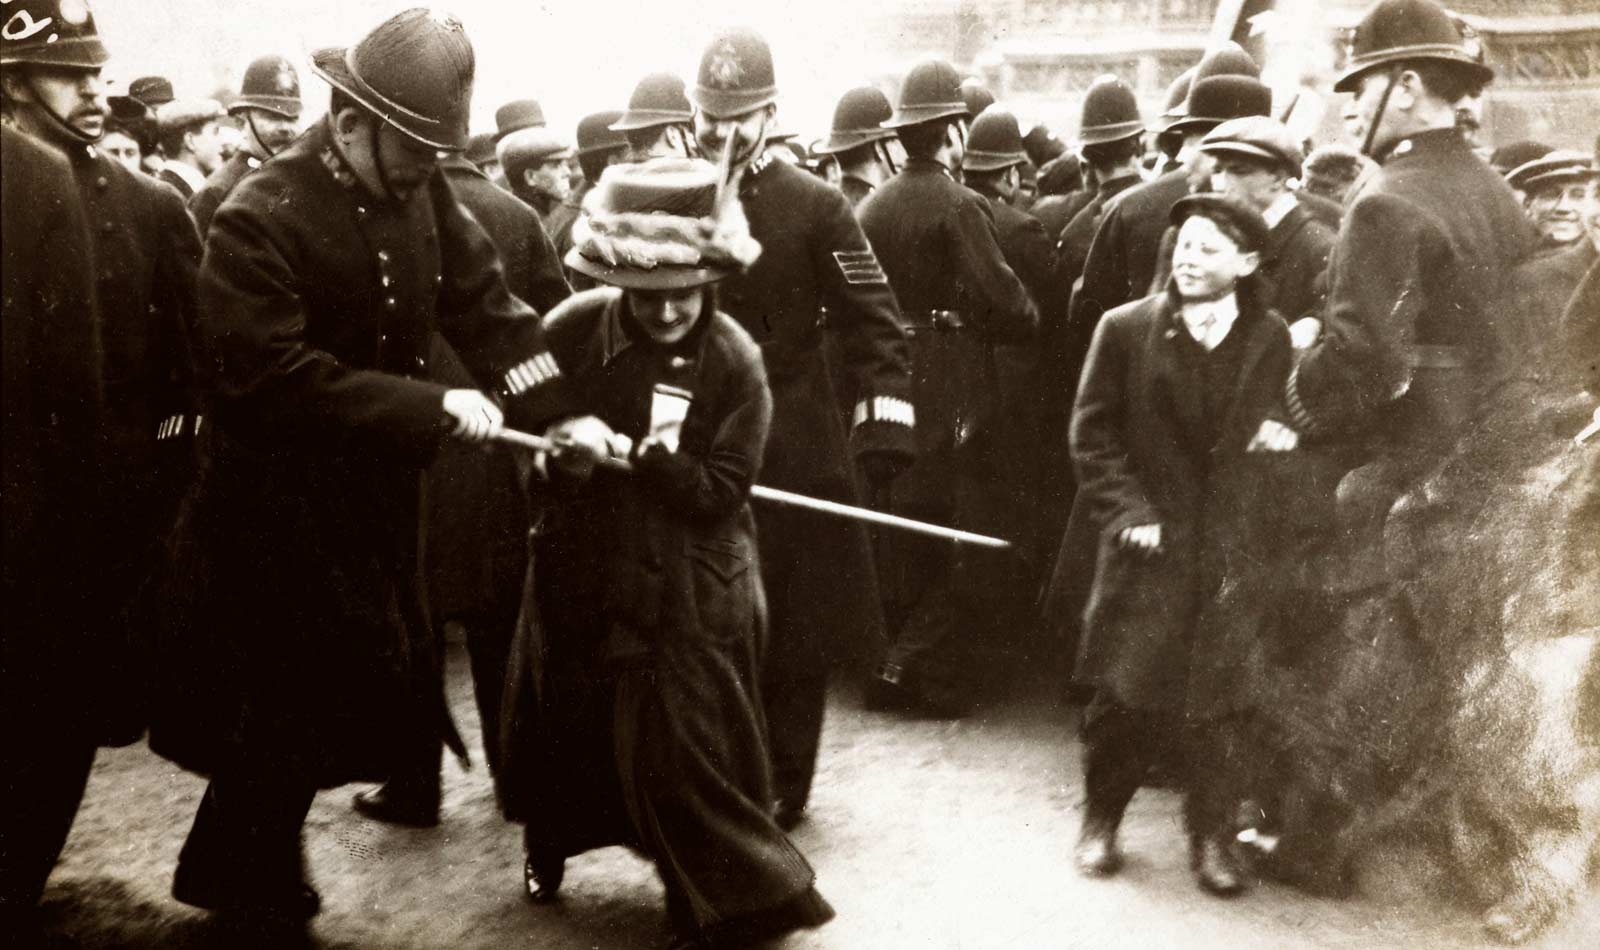 A Suffragette struggling with a policeman on Black Friday 18 November 1910. Furious suffragettes marched on the House of Commons in response to delays to the Conciliation Bill. The resulting riot ended in the arrest of 115 women and four men. Many of the protestors suffered violence, intimidation and even acts of indecency at the hands of the police. One suffragette noted 'Several times constables and plain-clothes men who were in the crowds passed their arms round me from the back and clutched hold of my breasts in as public a manner as possible, and men in the crowd followed their example...My skirt was lifted up as high as possible, and the constable attempted to lift me off the ground by raising his knee. This he could not do, so he threw me into the crowd and incited the men to treat me as they wished'.  < ...Read more

